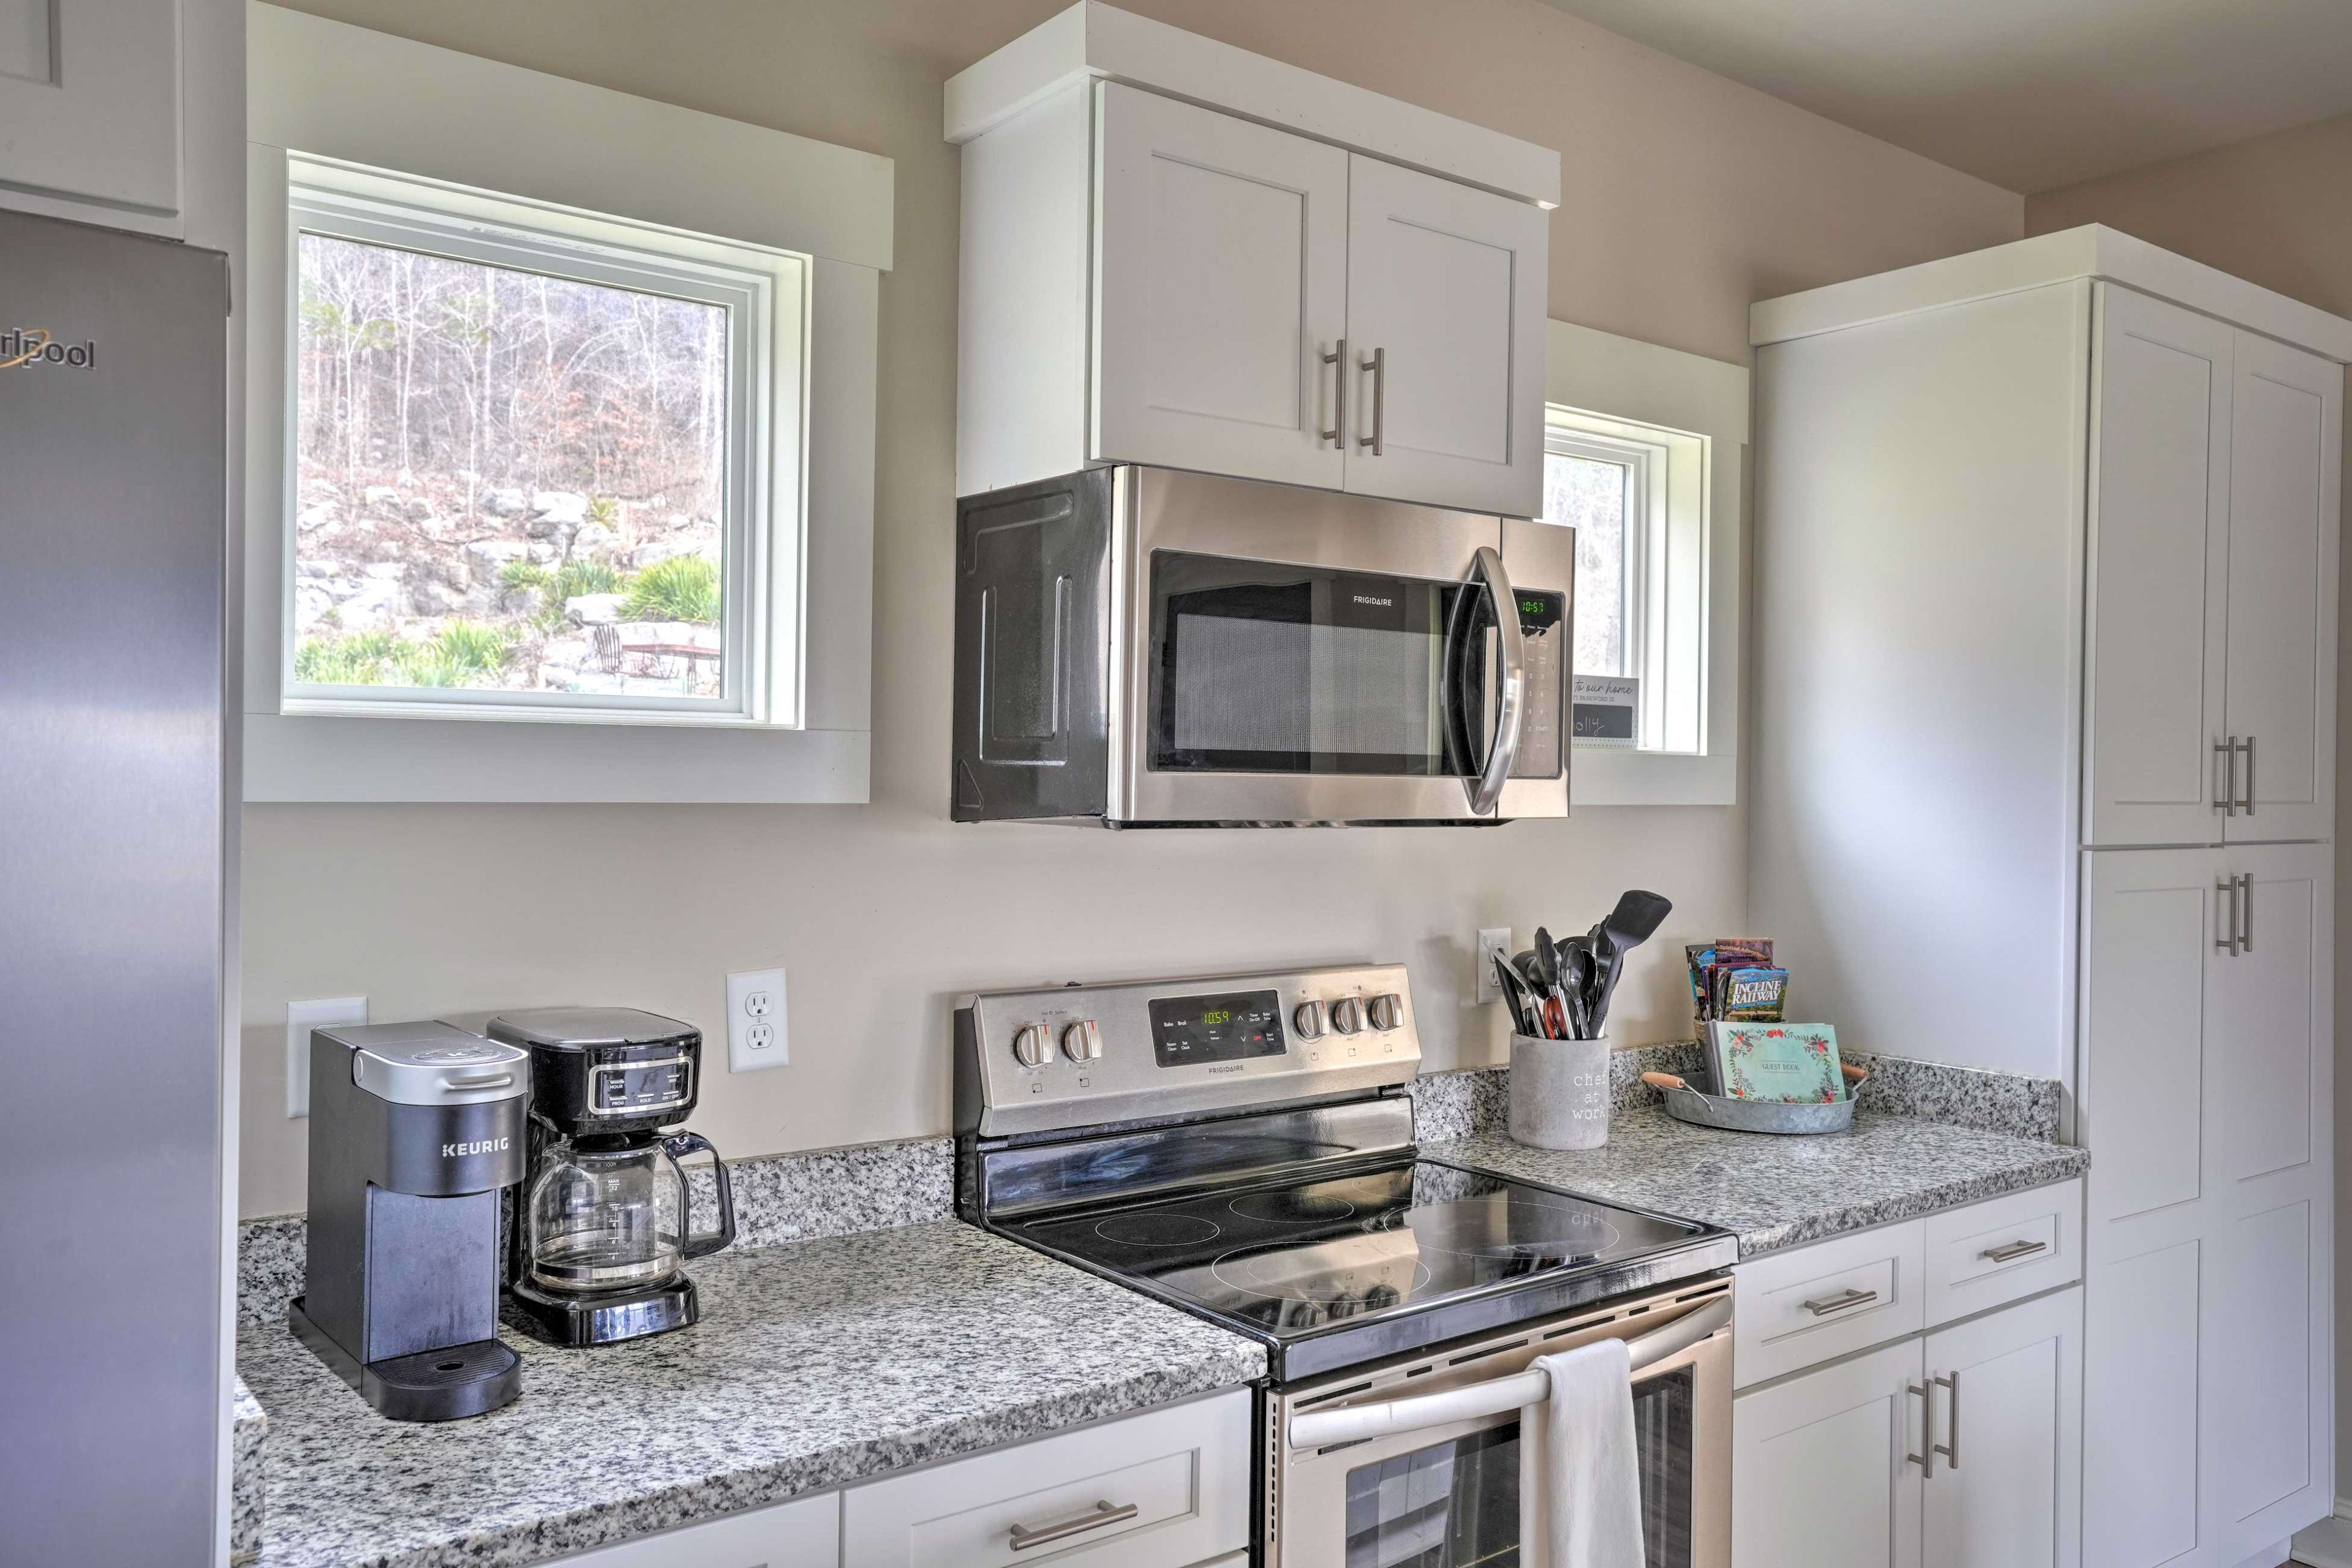 Fully Equipped Kitchen | Breakfast Bar | Trash Bags/Paper Towels Provided